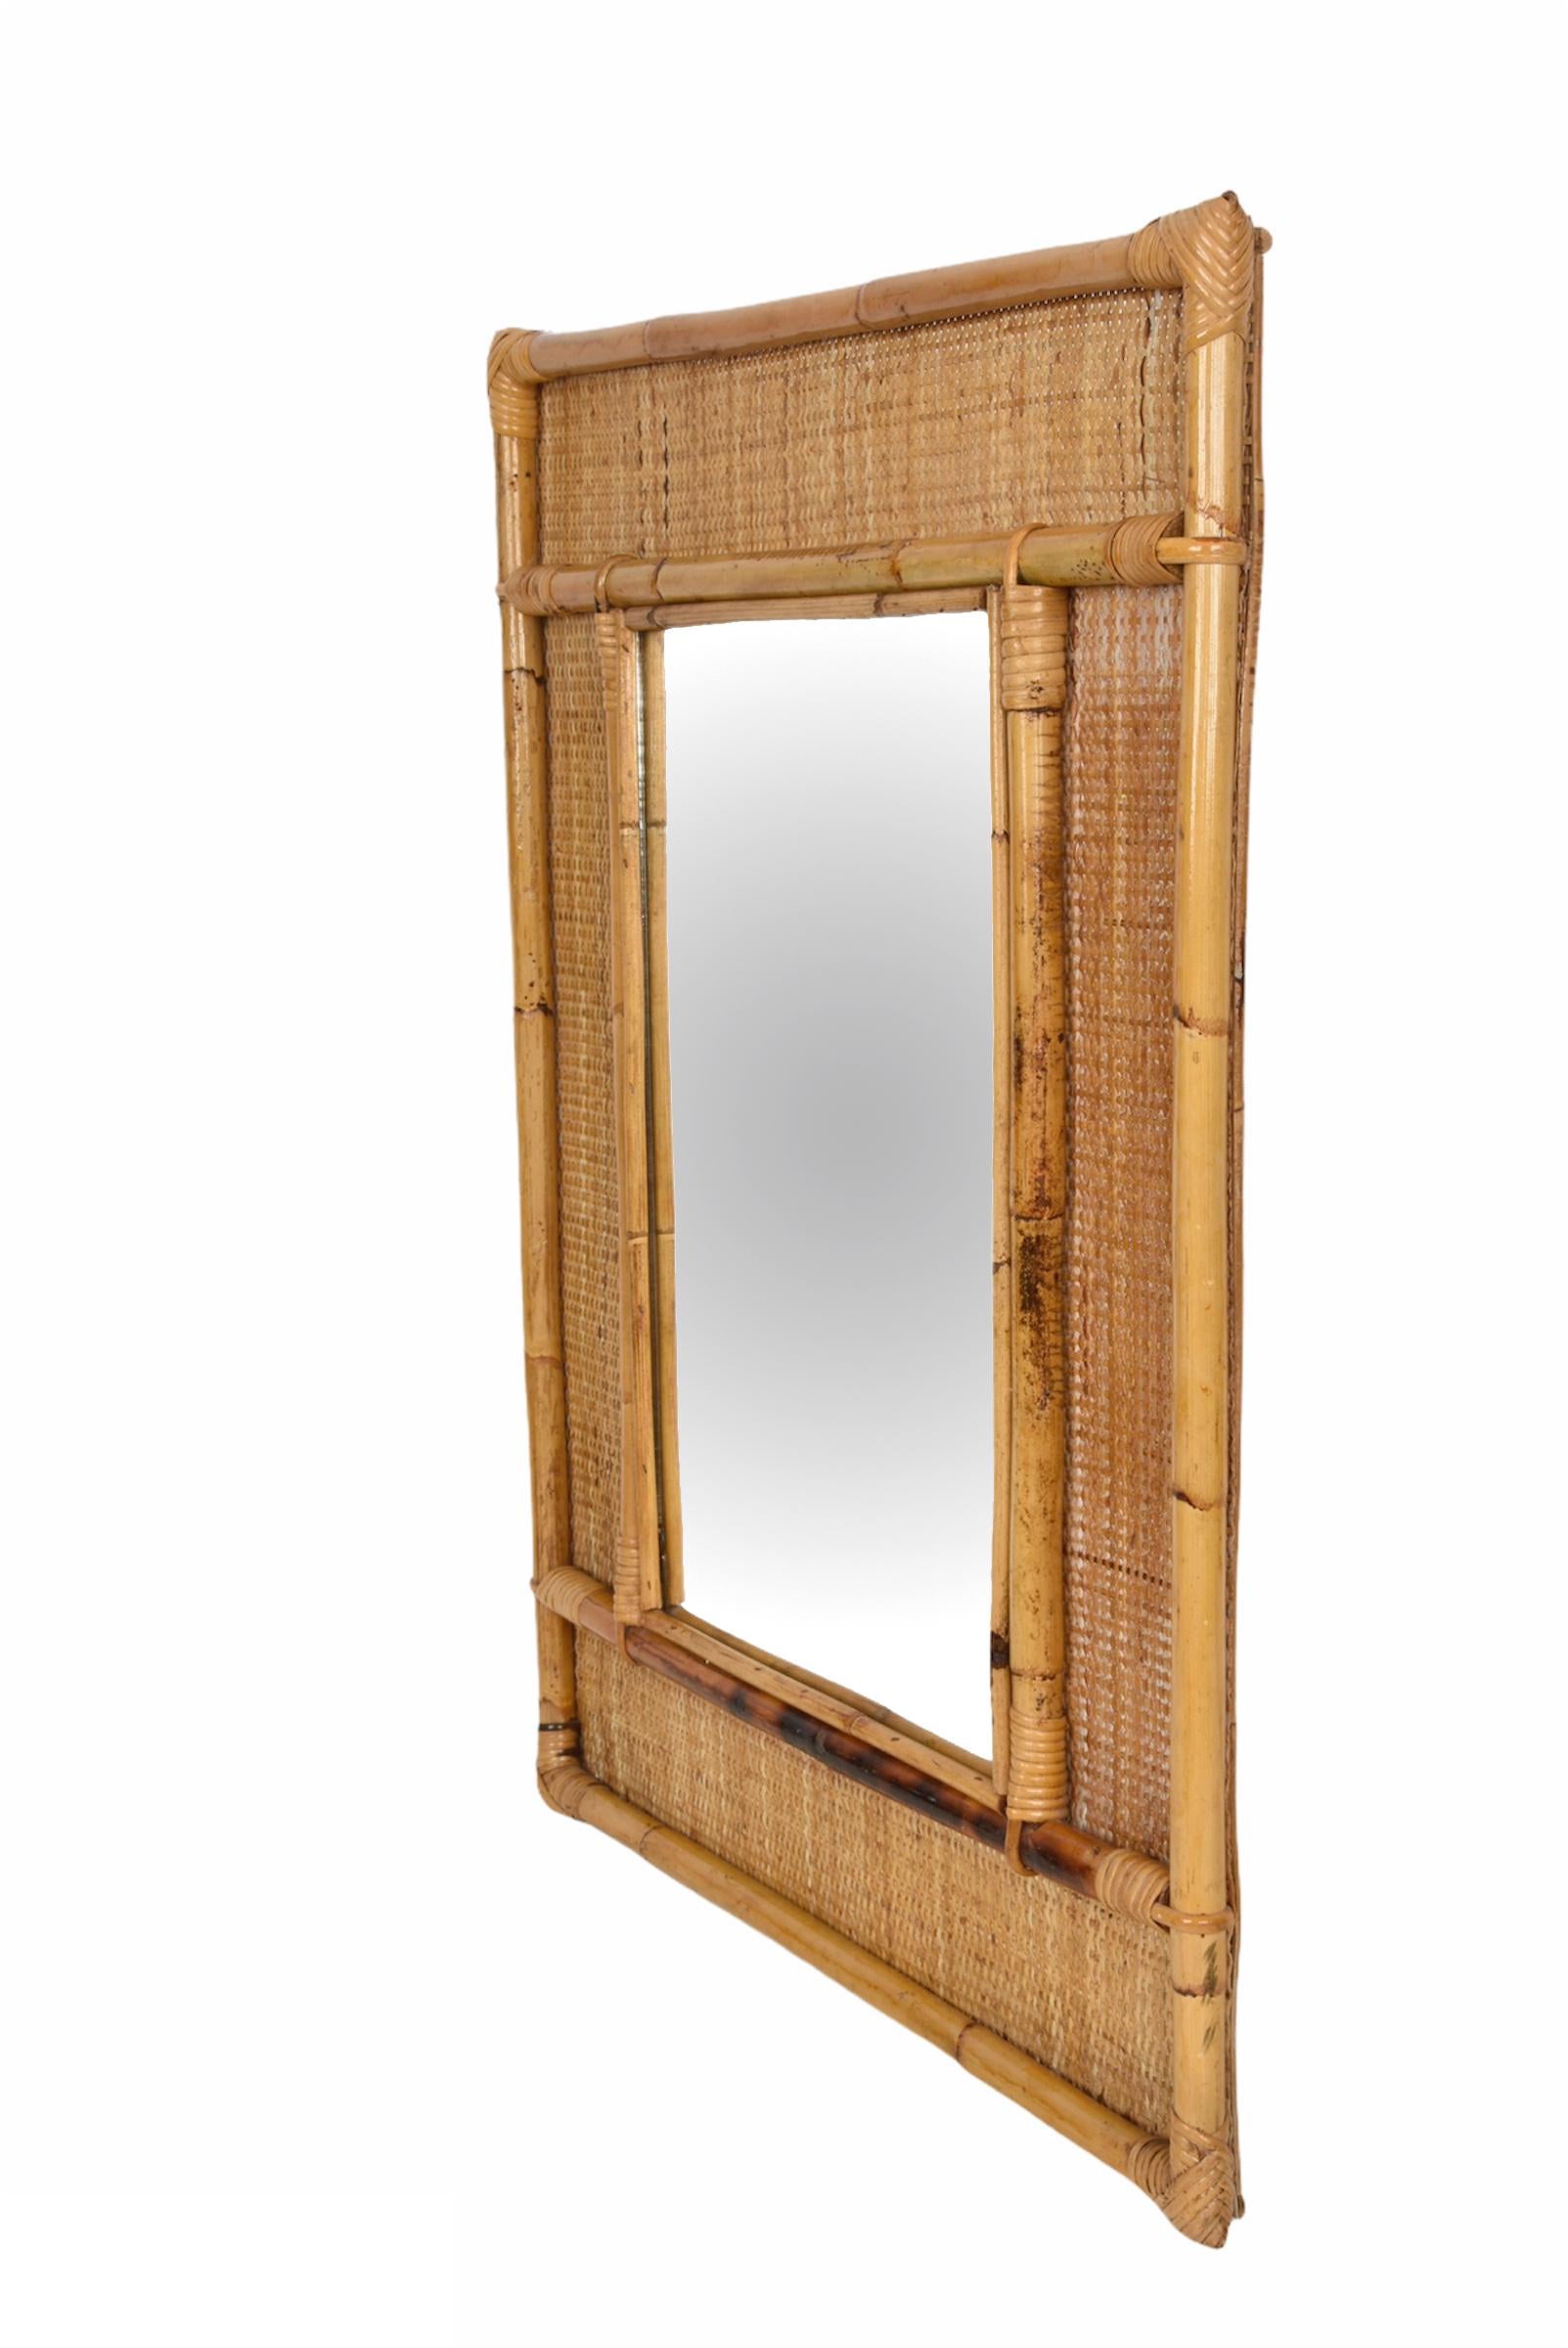 Midcentury Rectangular Italian Mirror with Bamboo and Woven Wicker Frame, 1970s 3